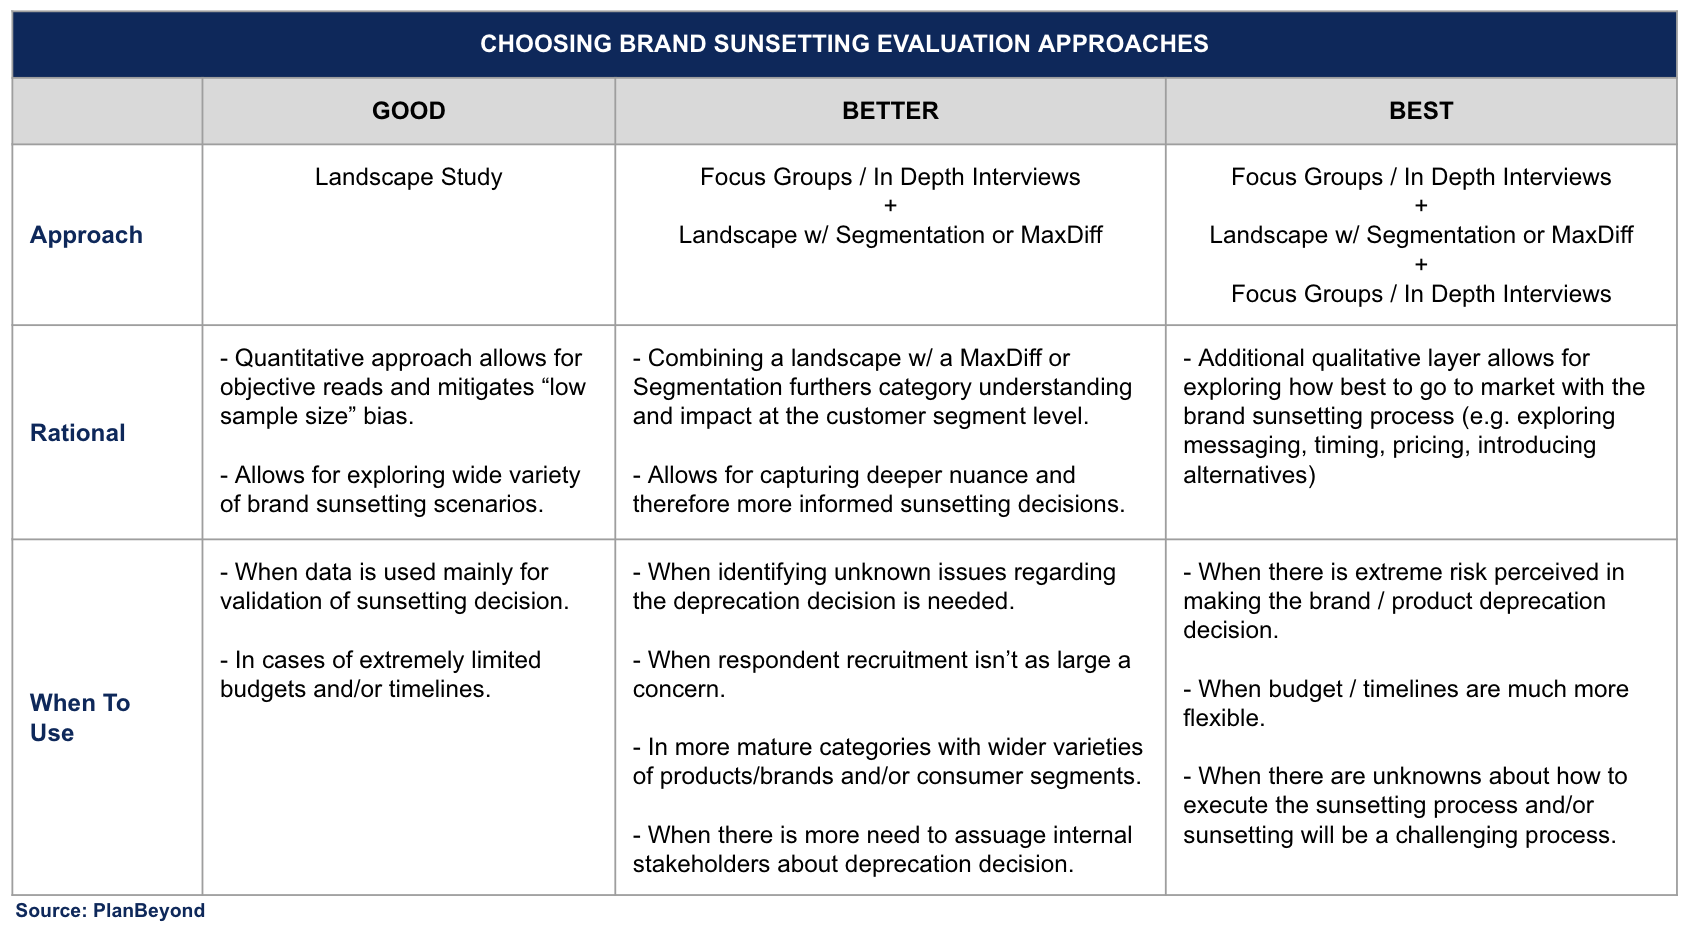 Choosing the Ideal Brand Sunsetting Evaluation Approach